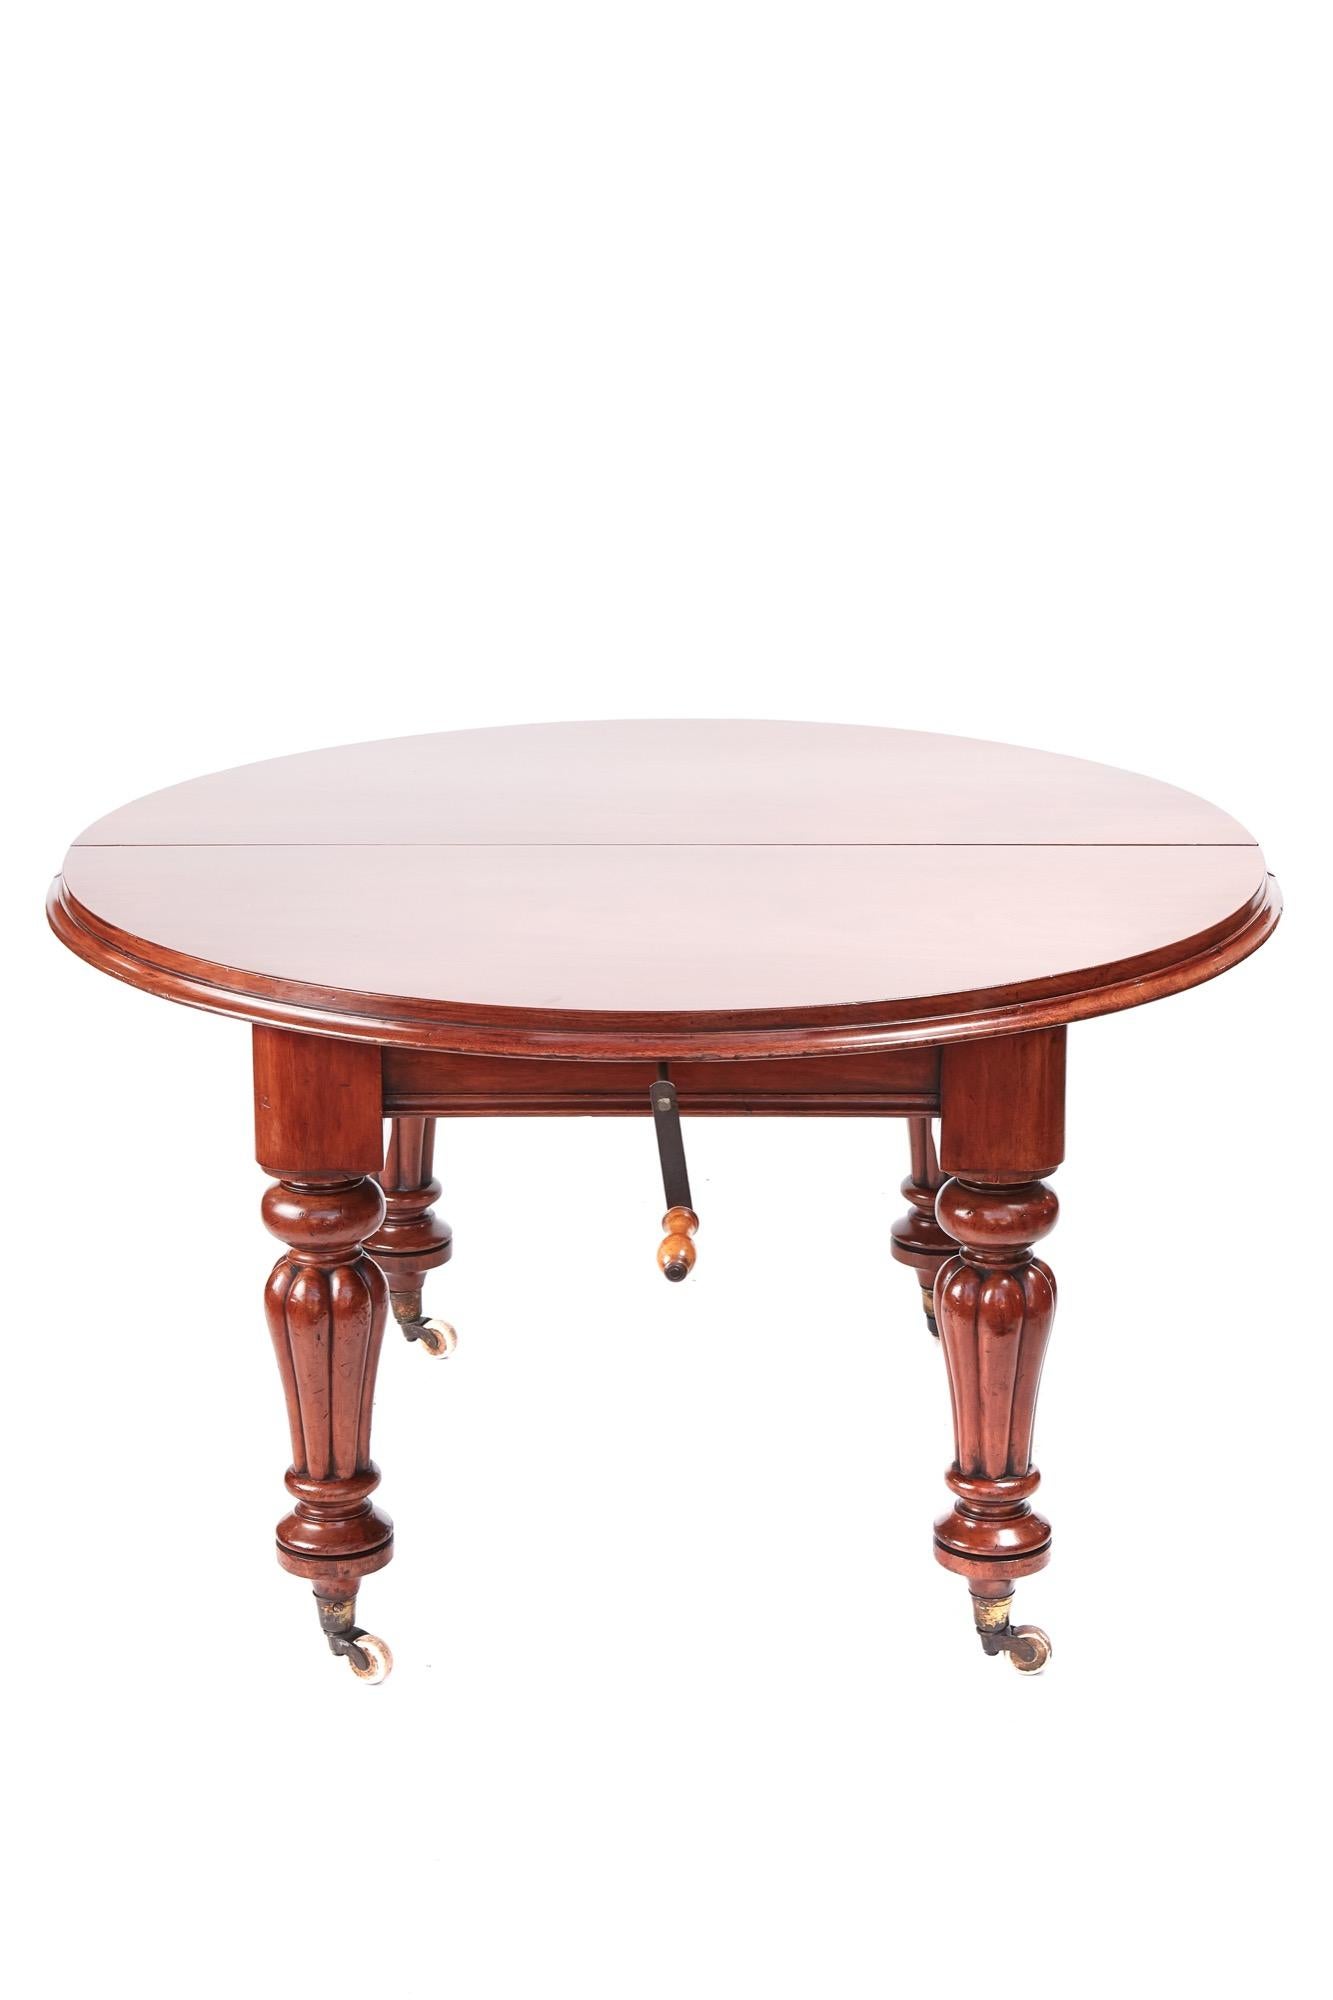 Quality Victorian mahogany circular extending dining table, having a lovely quality flamed mahogany top with a molded edge, two original leaves, original winding handle, standing on shaped reeded legs with original castors
lovely color and